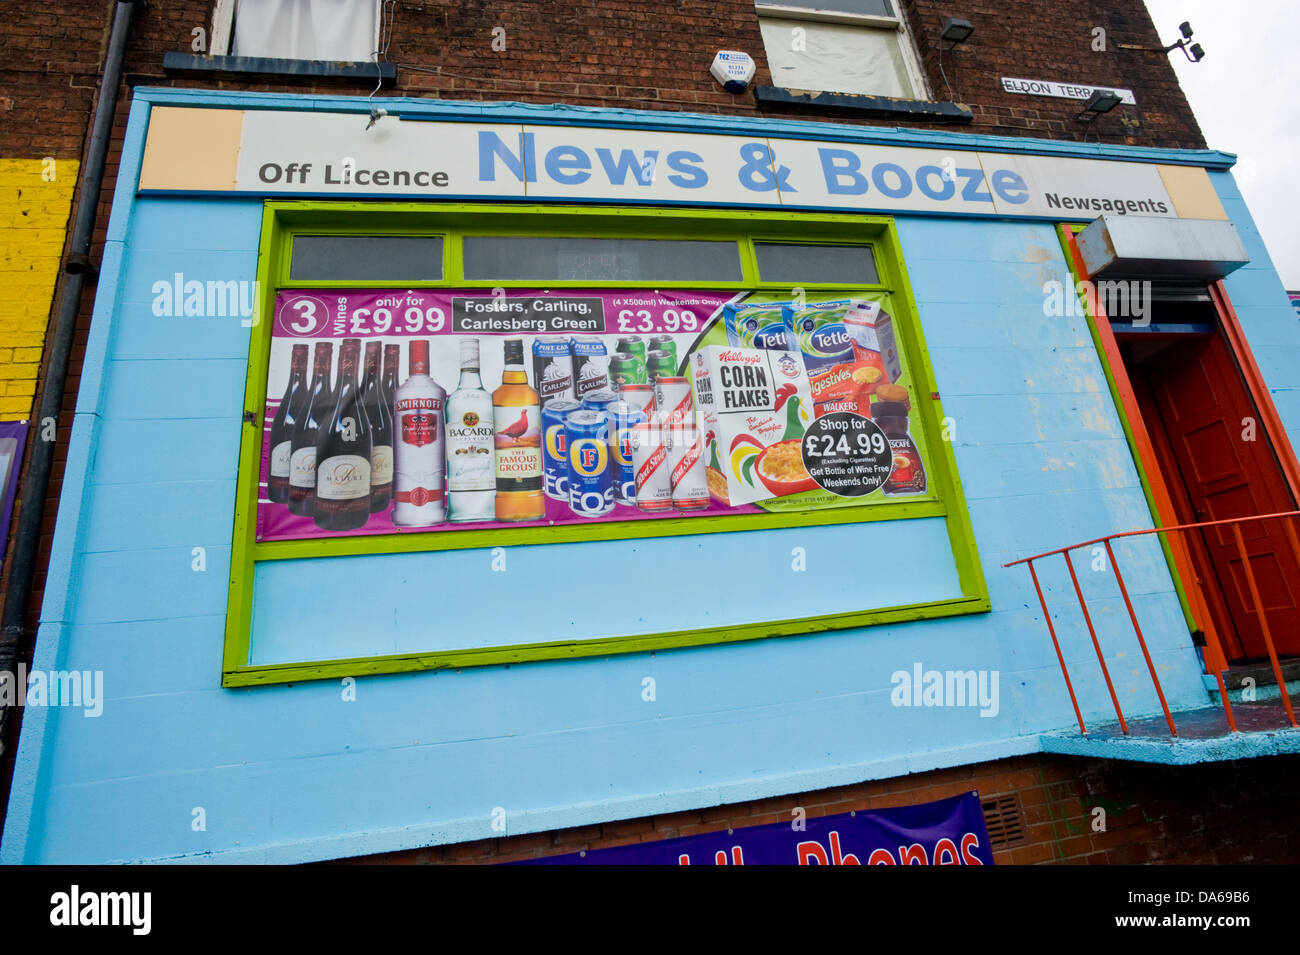 Off Licence and Newsagents at Eldon Terrace Leeds West Yorkshire England UK Stock Photo